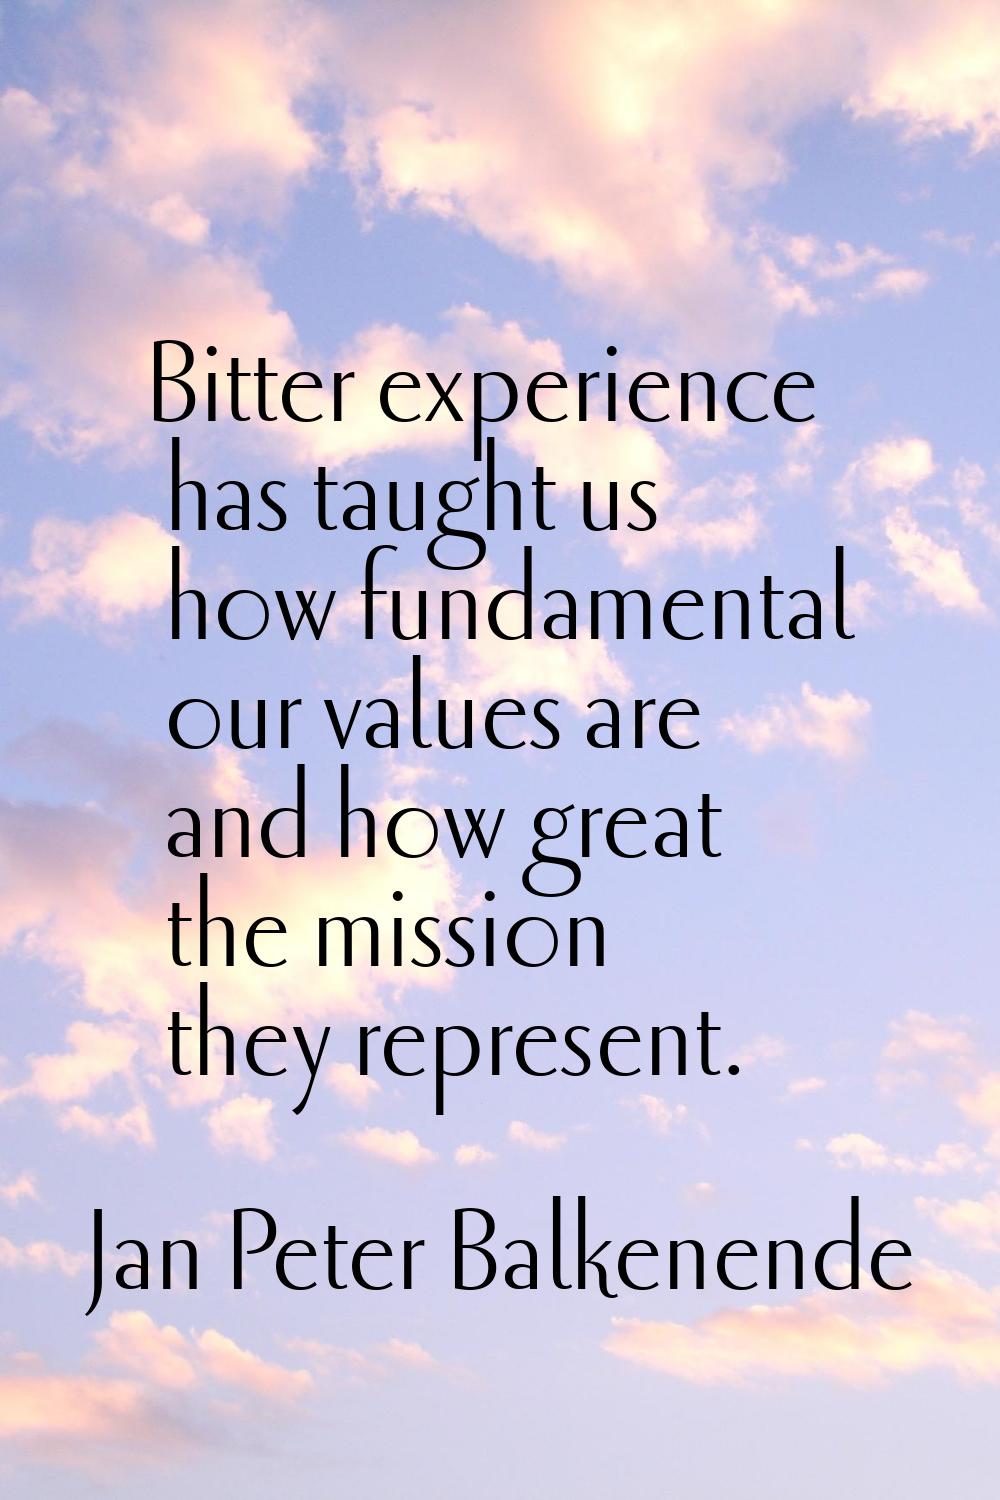 Bitter experience has taught us how fundamental our values are and how great the mission they repre